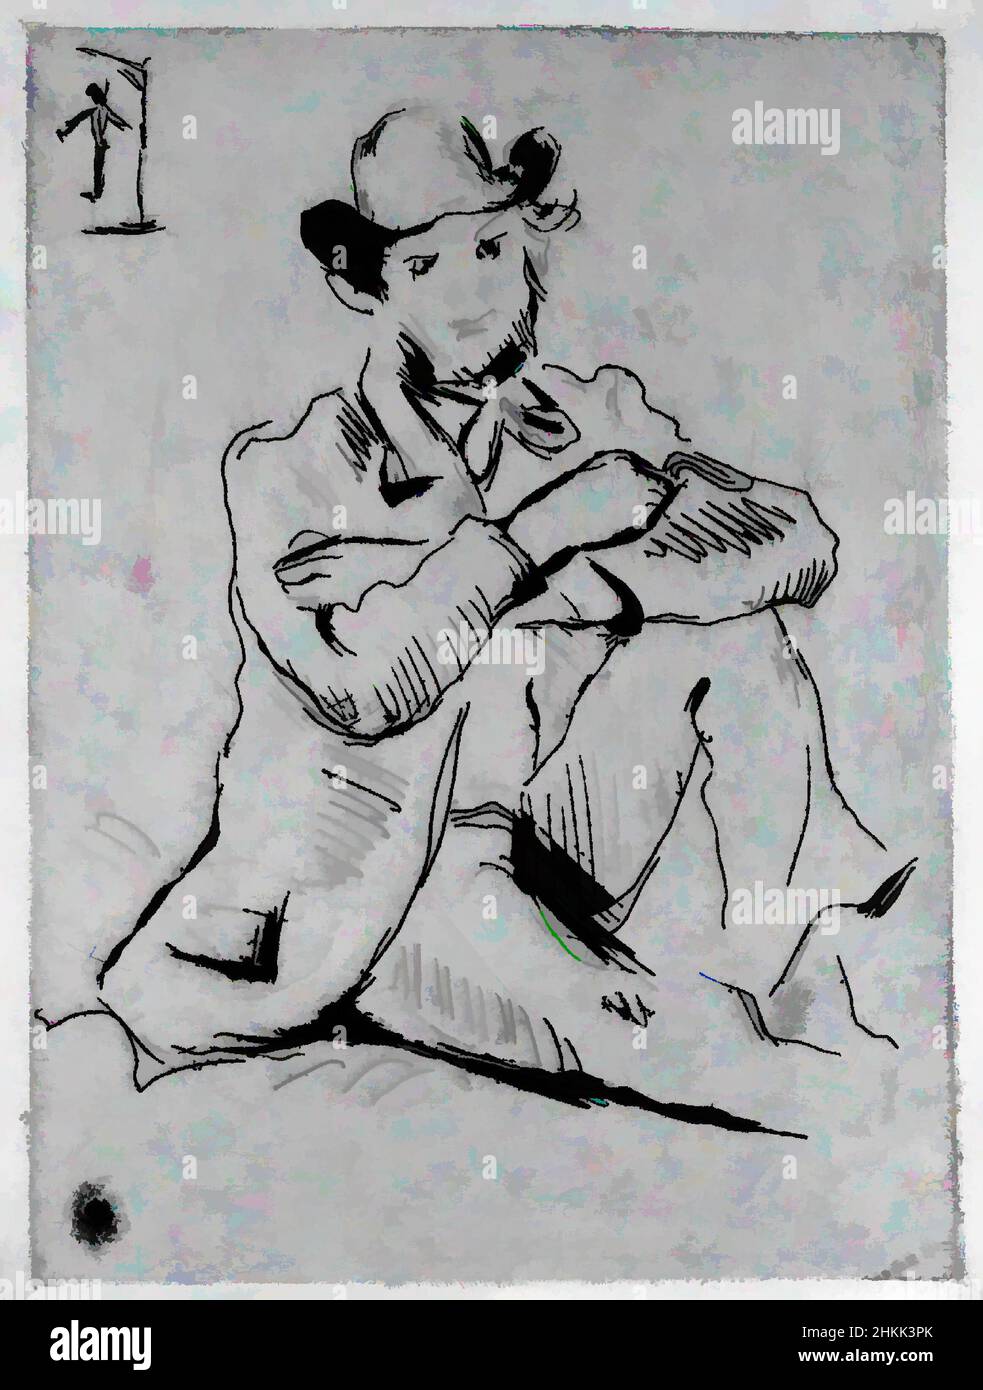 Art inspired by Guillaumin at the Hanged Man, Guillaumin au pendu, Paul Cézanne, French, 1839-1906, Etching on laid paper, France, 1873, 6 1/8 x 4 3/4 in., 15.6 x 12 cm, Classic works modernized by Artotop with a splash of modernity. Shapes, color and value, eye-catching visual impact on art. Emotions through freedom of artworks in a contemporary way. A timeless message pursuing a wildly creative new direction. Artists turning to the digital medium and creating the Artotop NFT Stock Photo